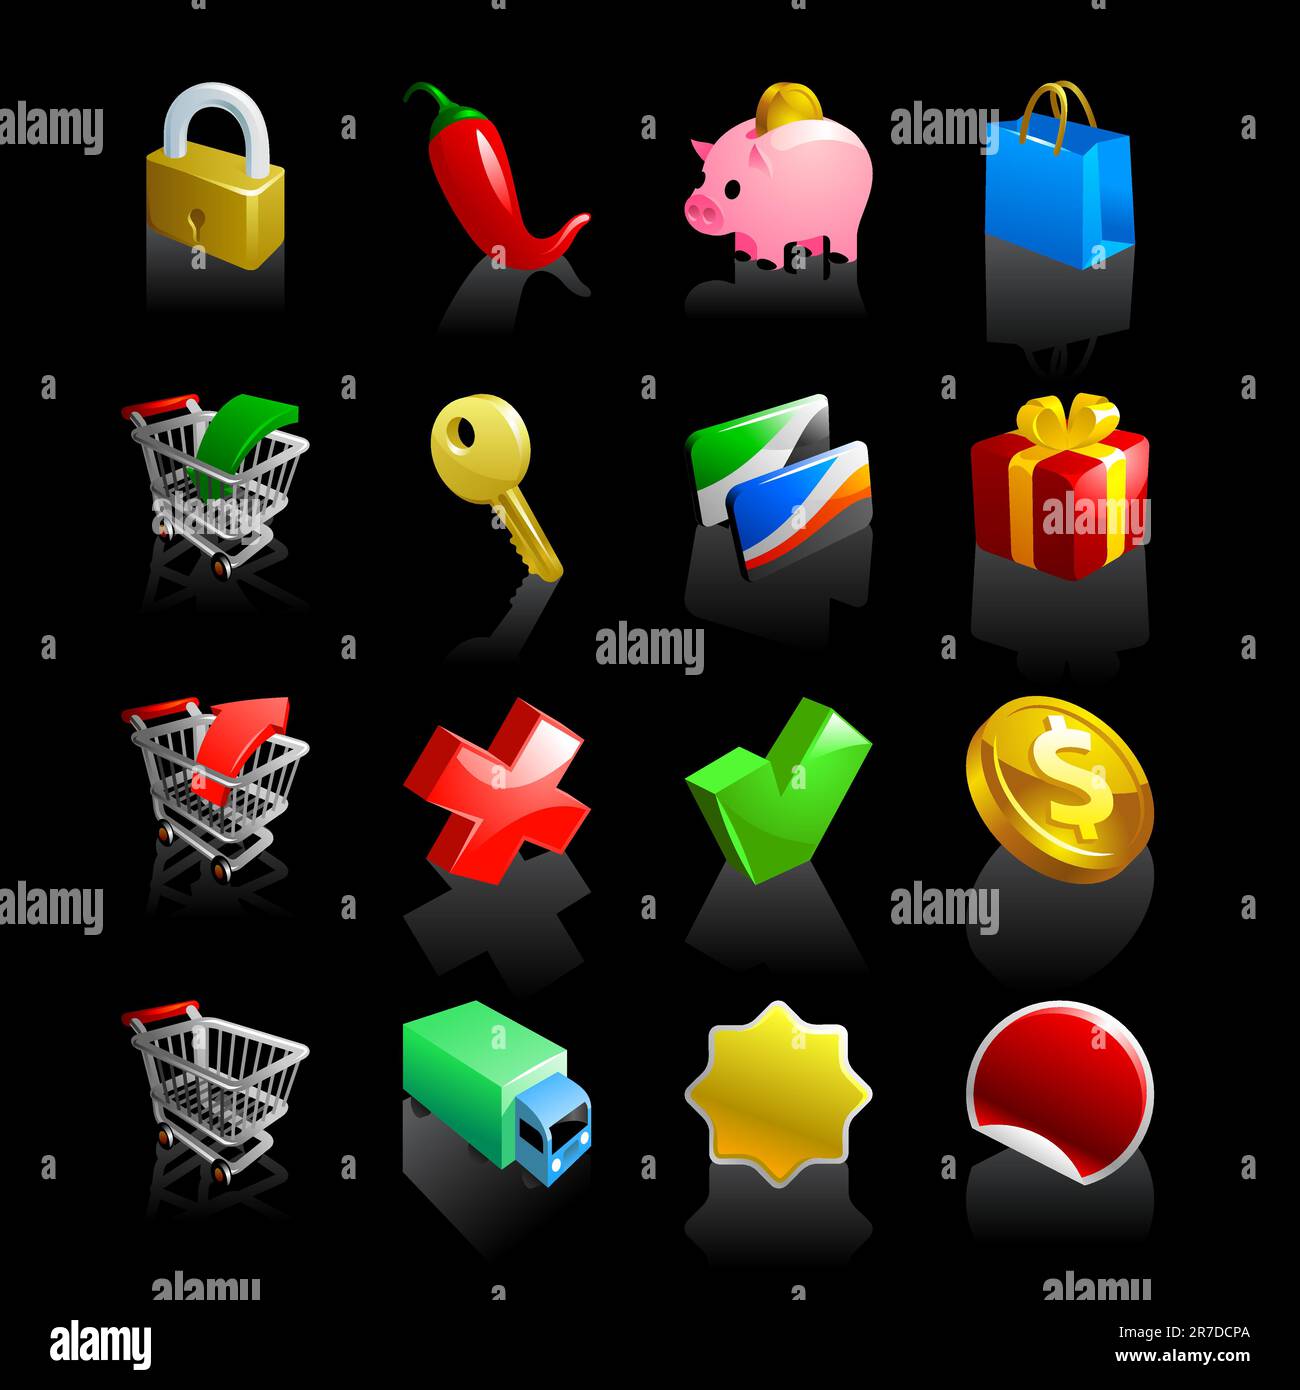 a set of 16 e-commerce icons for web site user interface Stock Vector